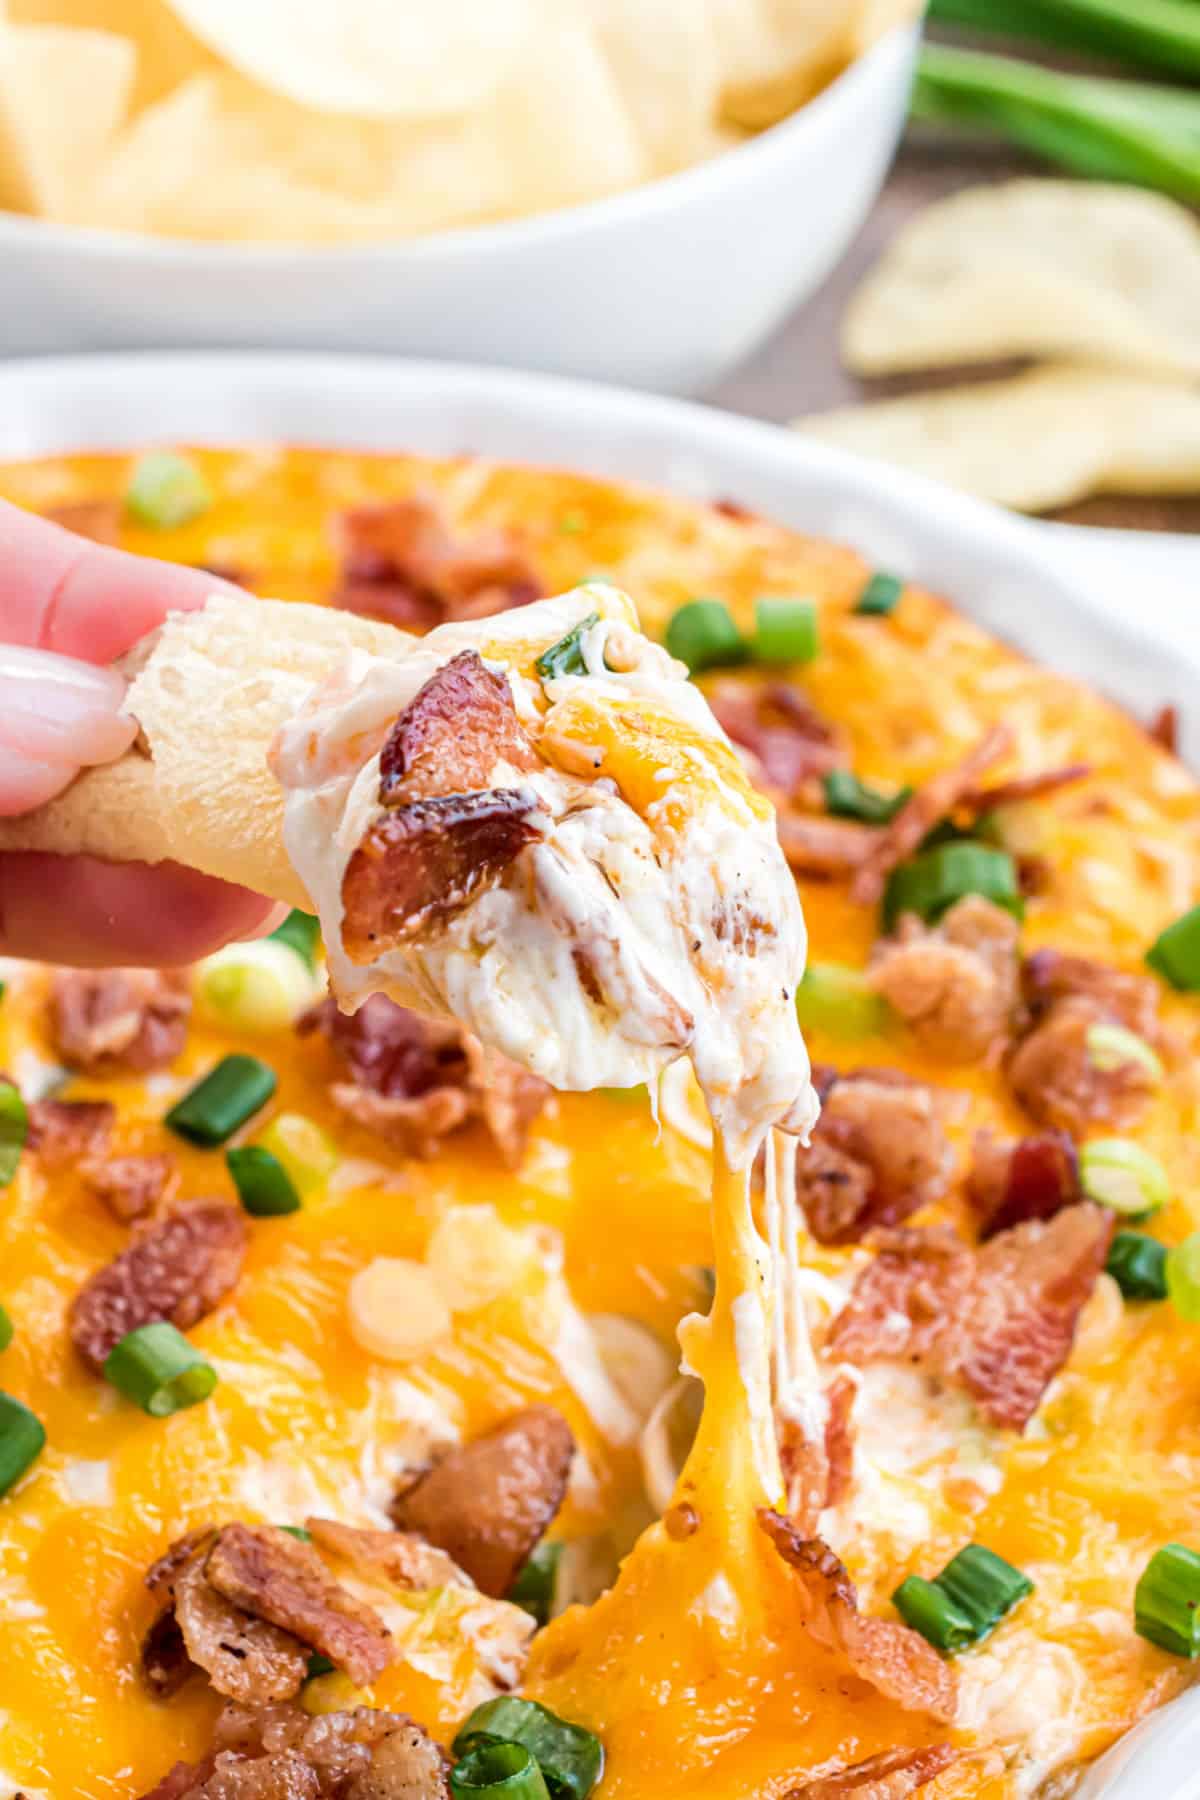 Potato chip scooping up warm and cheesy dip topped with bacon.